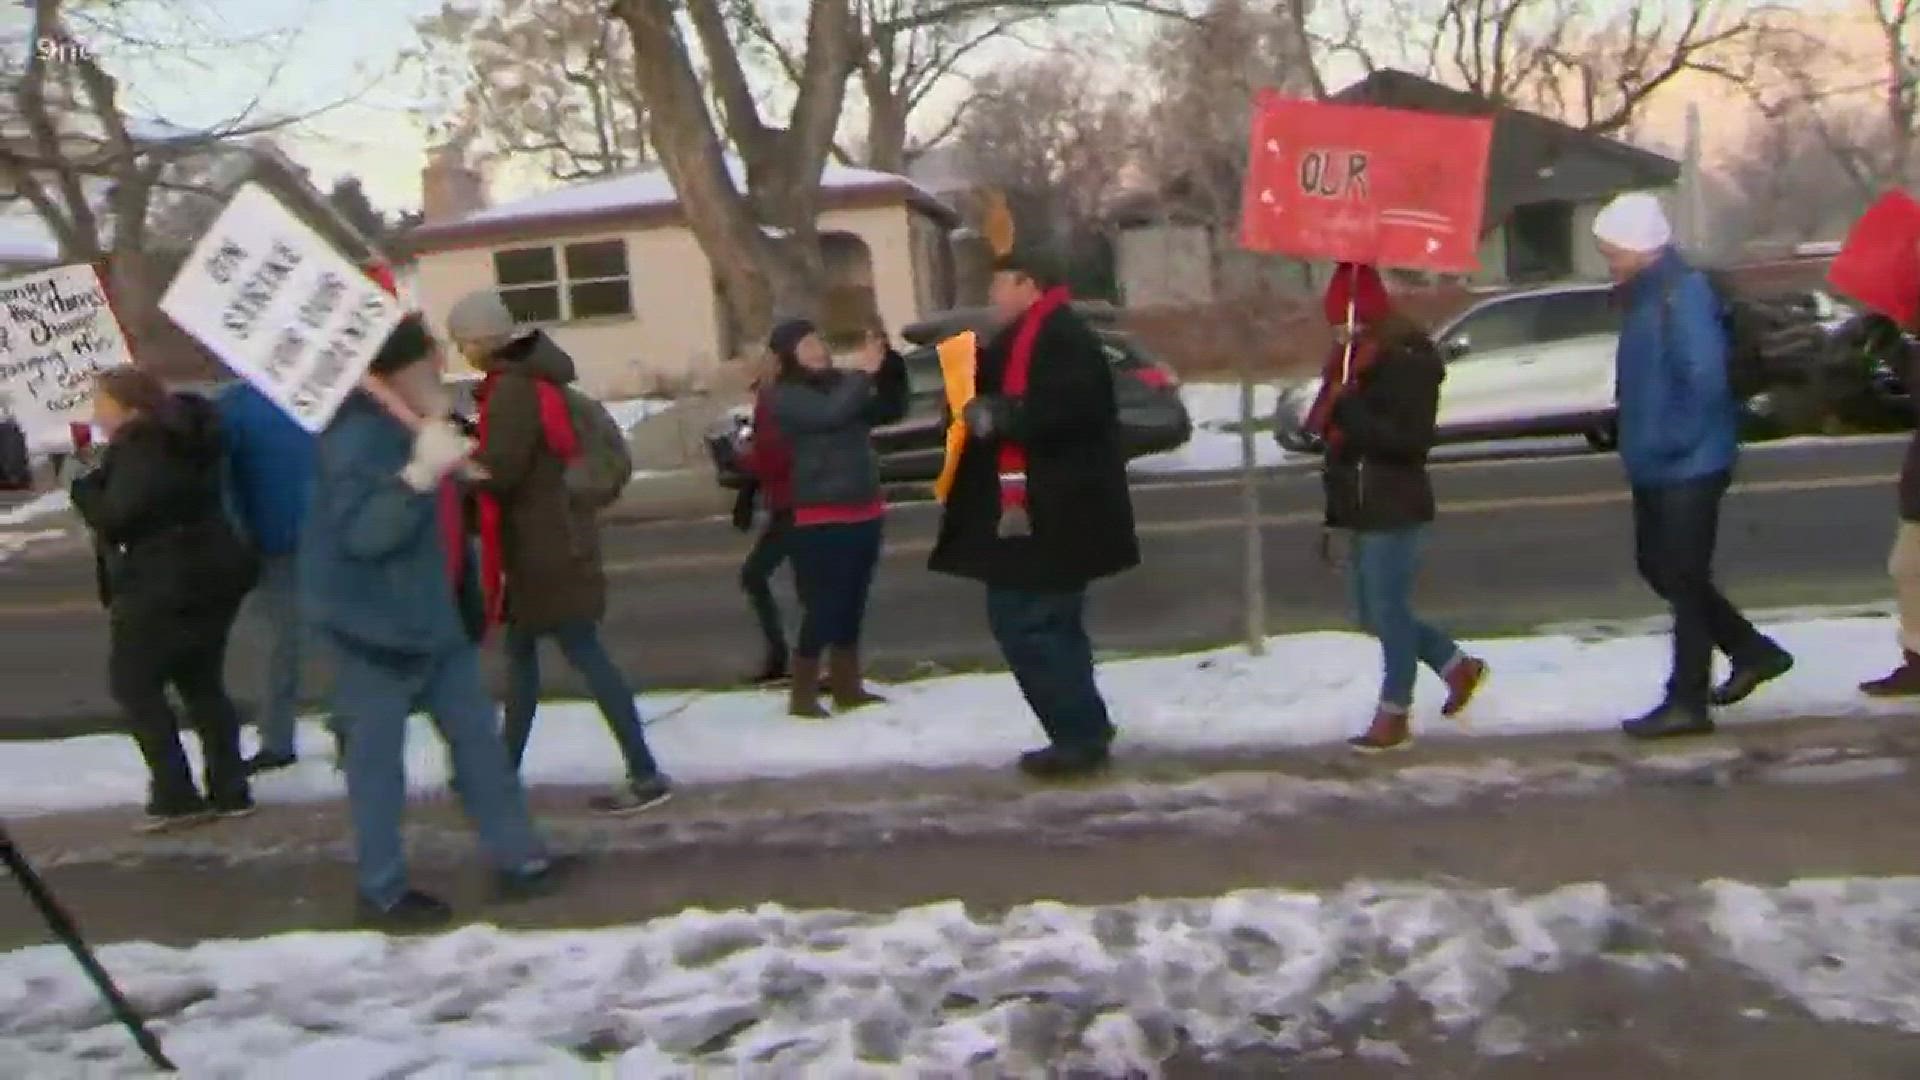 The latest update on the first strike in the Denver Public School District in 25 years from 9NEWS at 7 a.m.